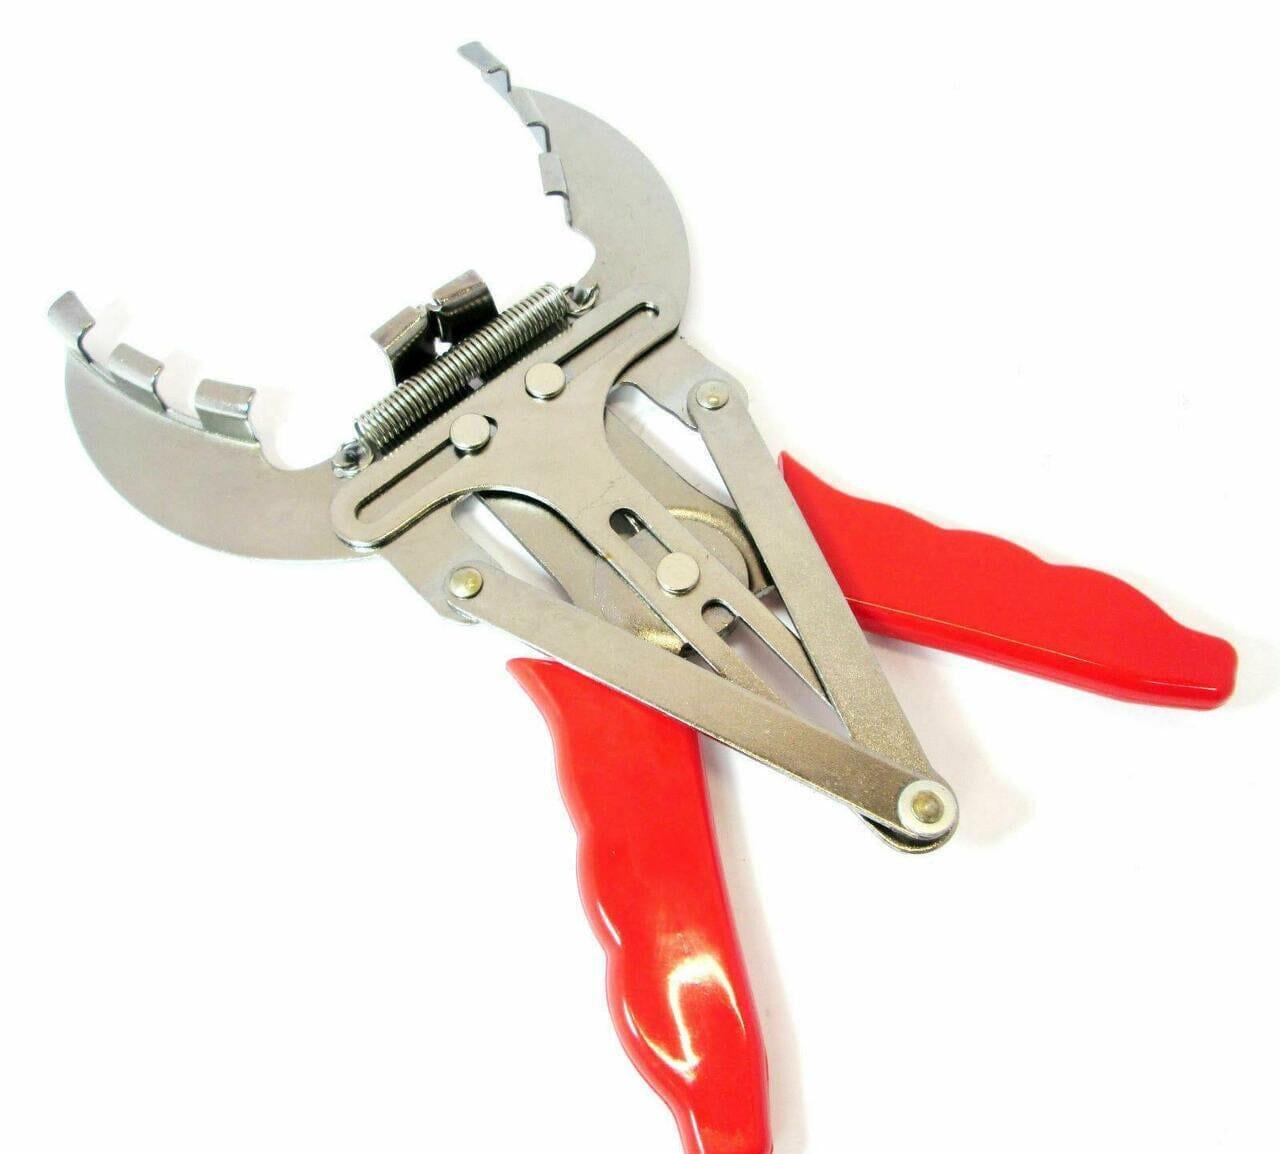 New KING Universal Piston Ring Installer Remover Pliers, Expander